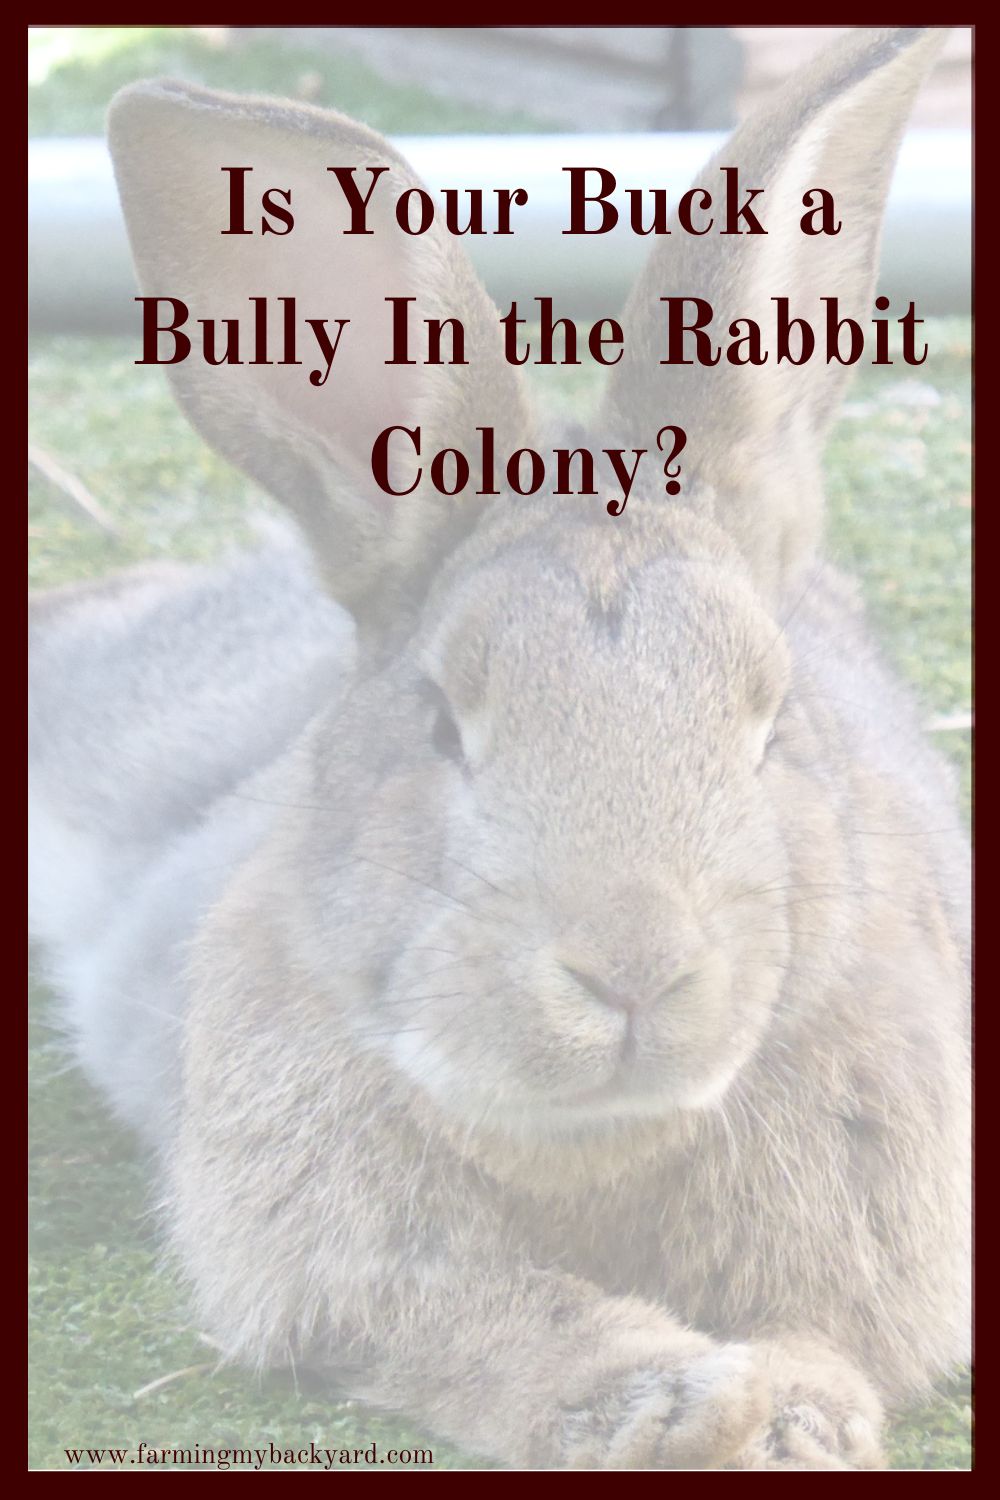 There are good and bad aspects to including your rabbit buck in your colony. Here are some ways to handle your buck's behavior.